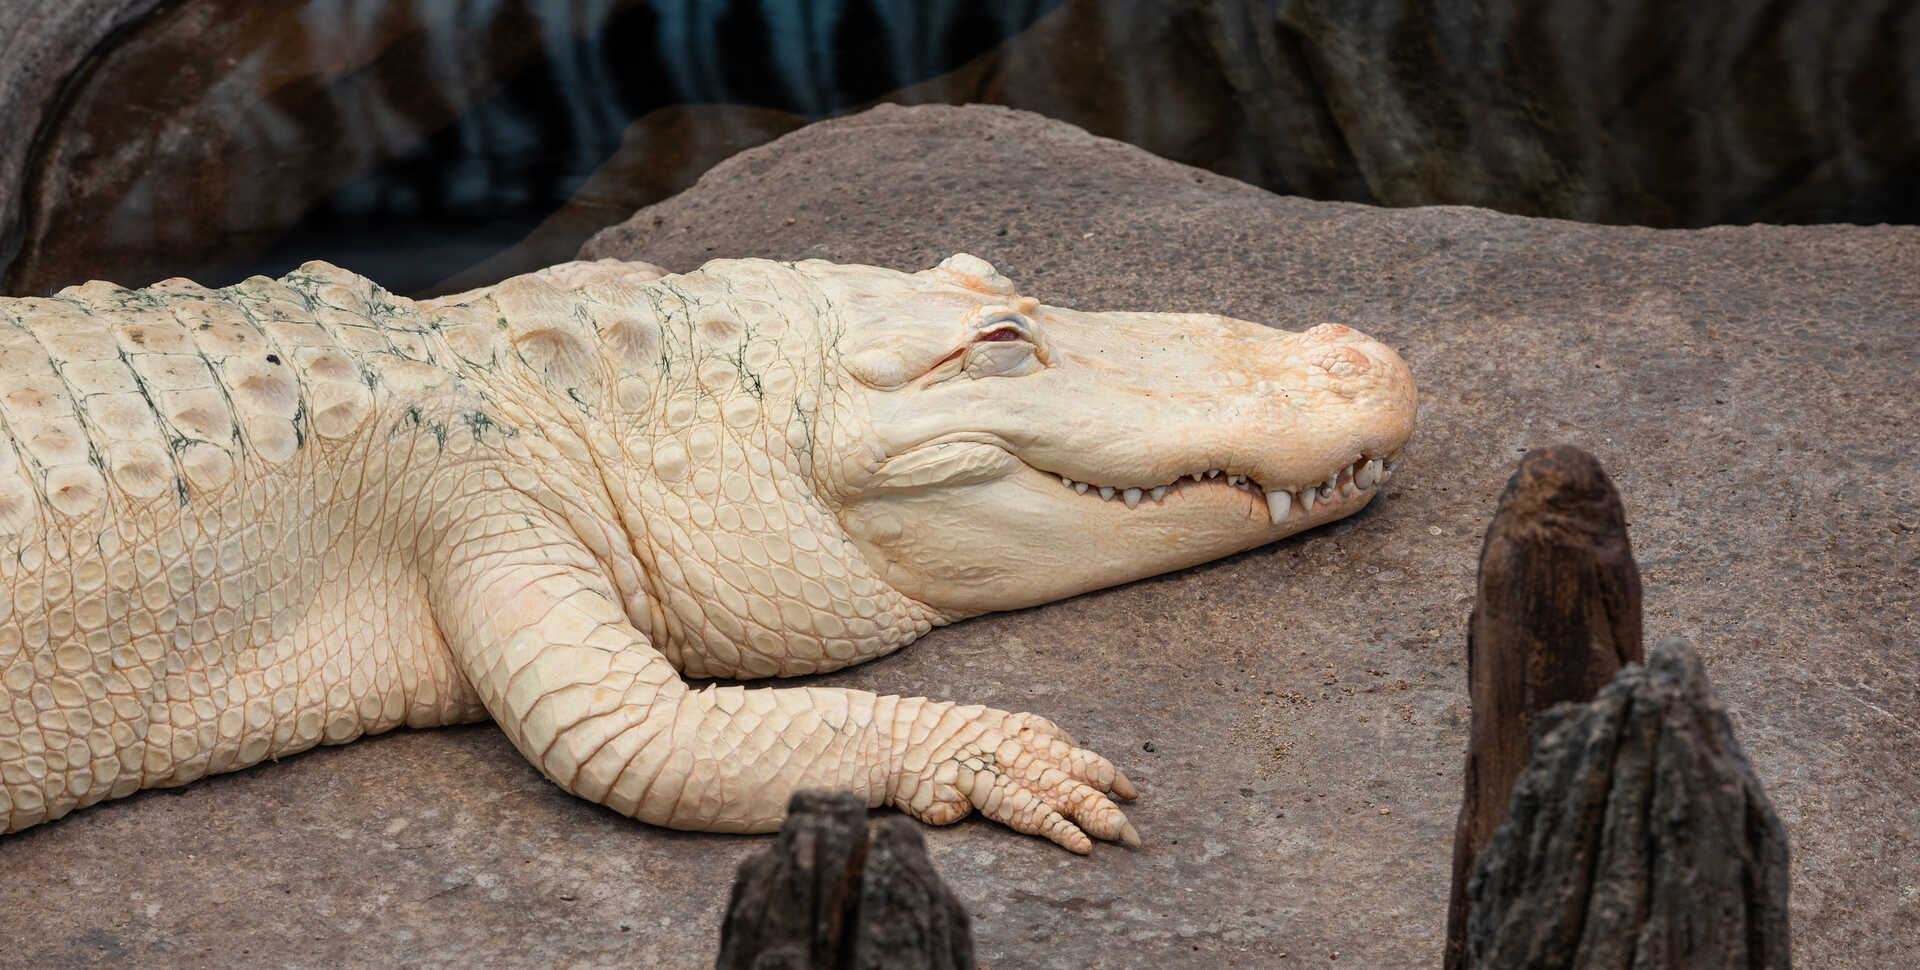 Claude the alligator naps on his heated rock